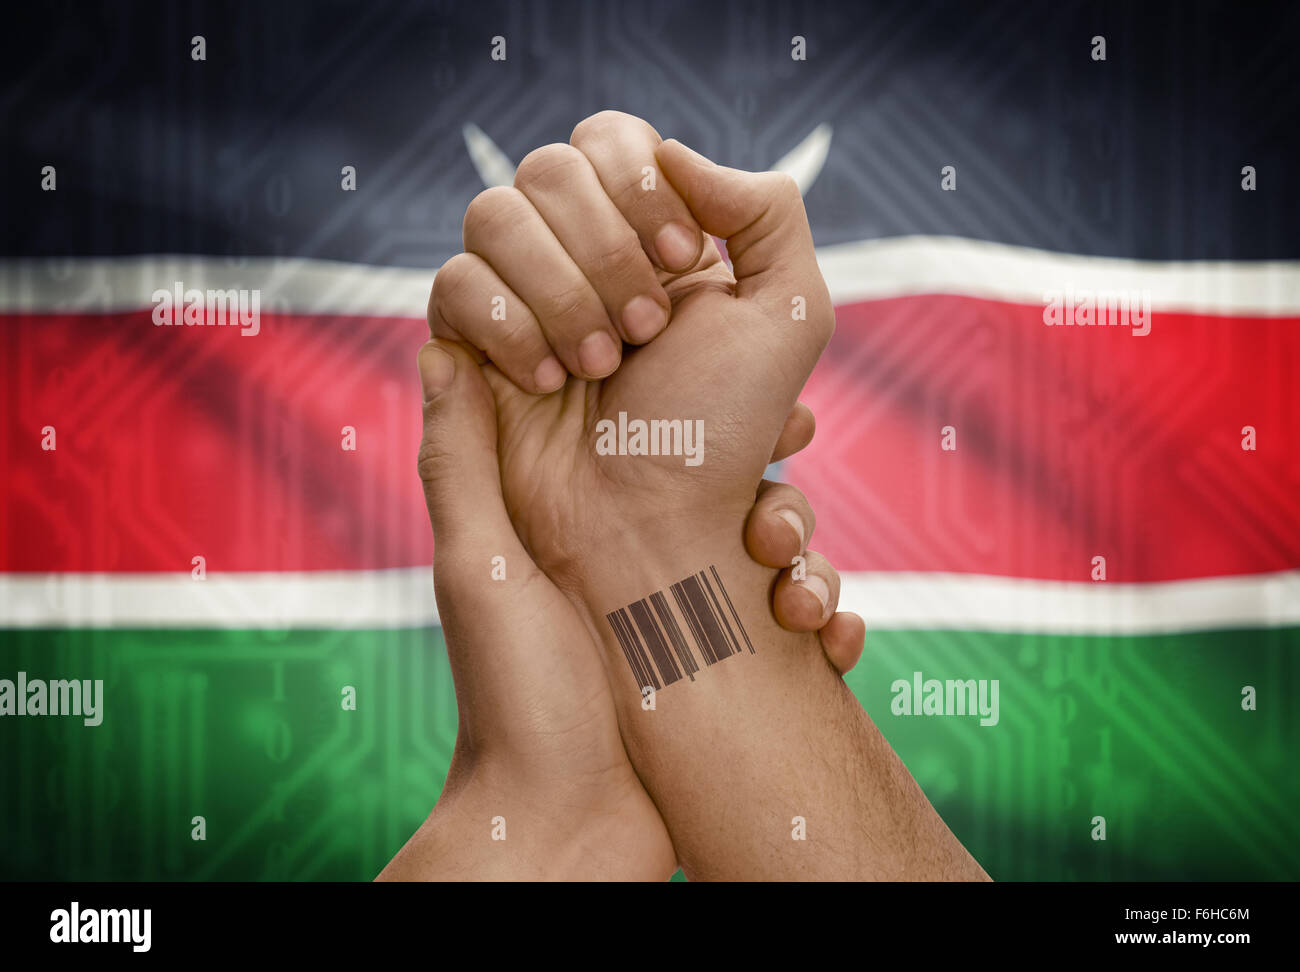 Barcode ID number tattoo on wrist of dark skinned person and national flag on background - Kenya Stock Photo